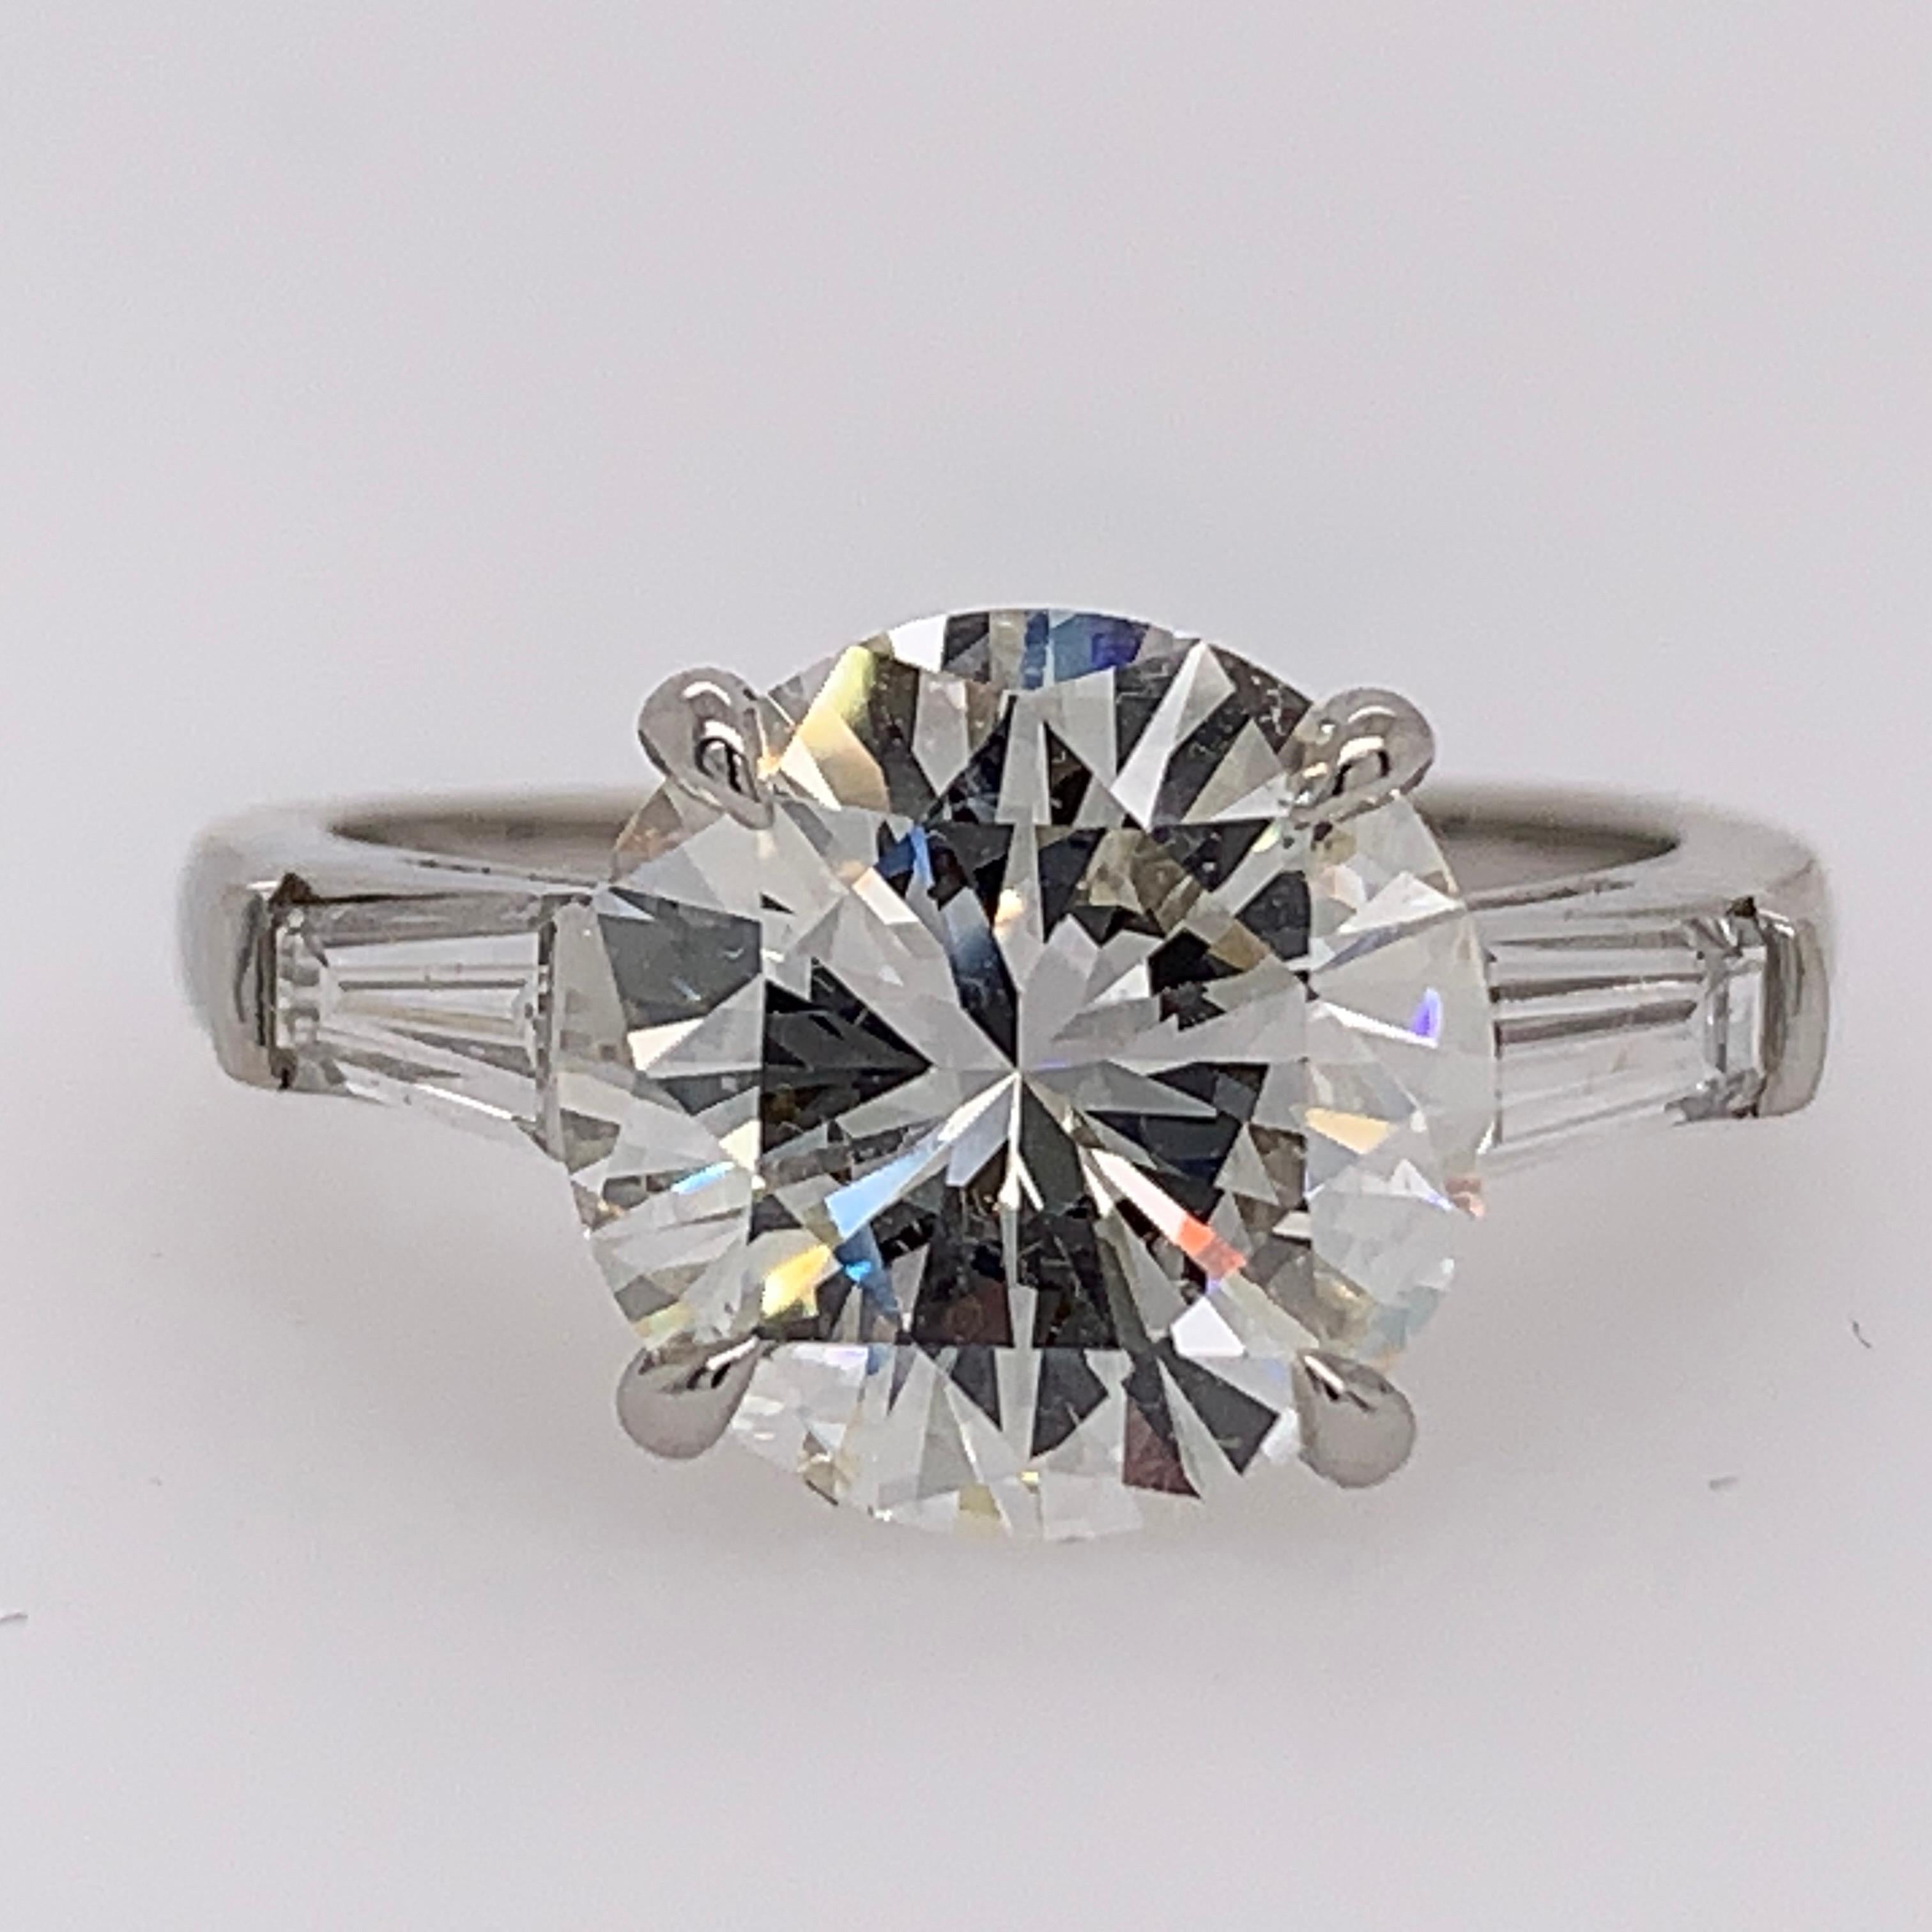 Platinum Ring (Size 5) set with a 3.08 carat EGL USA certified H VS2 Round Brilliant Natural Diamond. No Fluorescence. The stone diameter is an impressive 9.53mm, very pleasant color and clarity (faces up white and eye clean). 

The stone is set